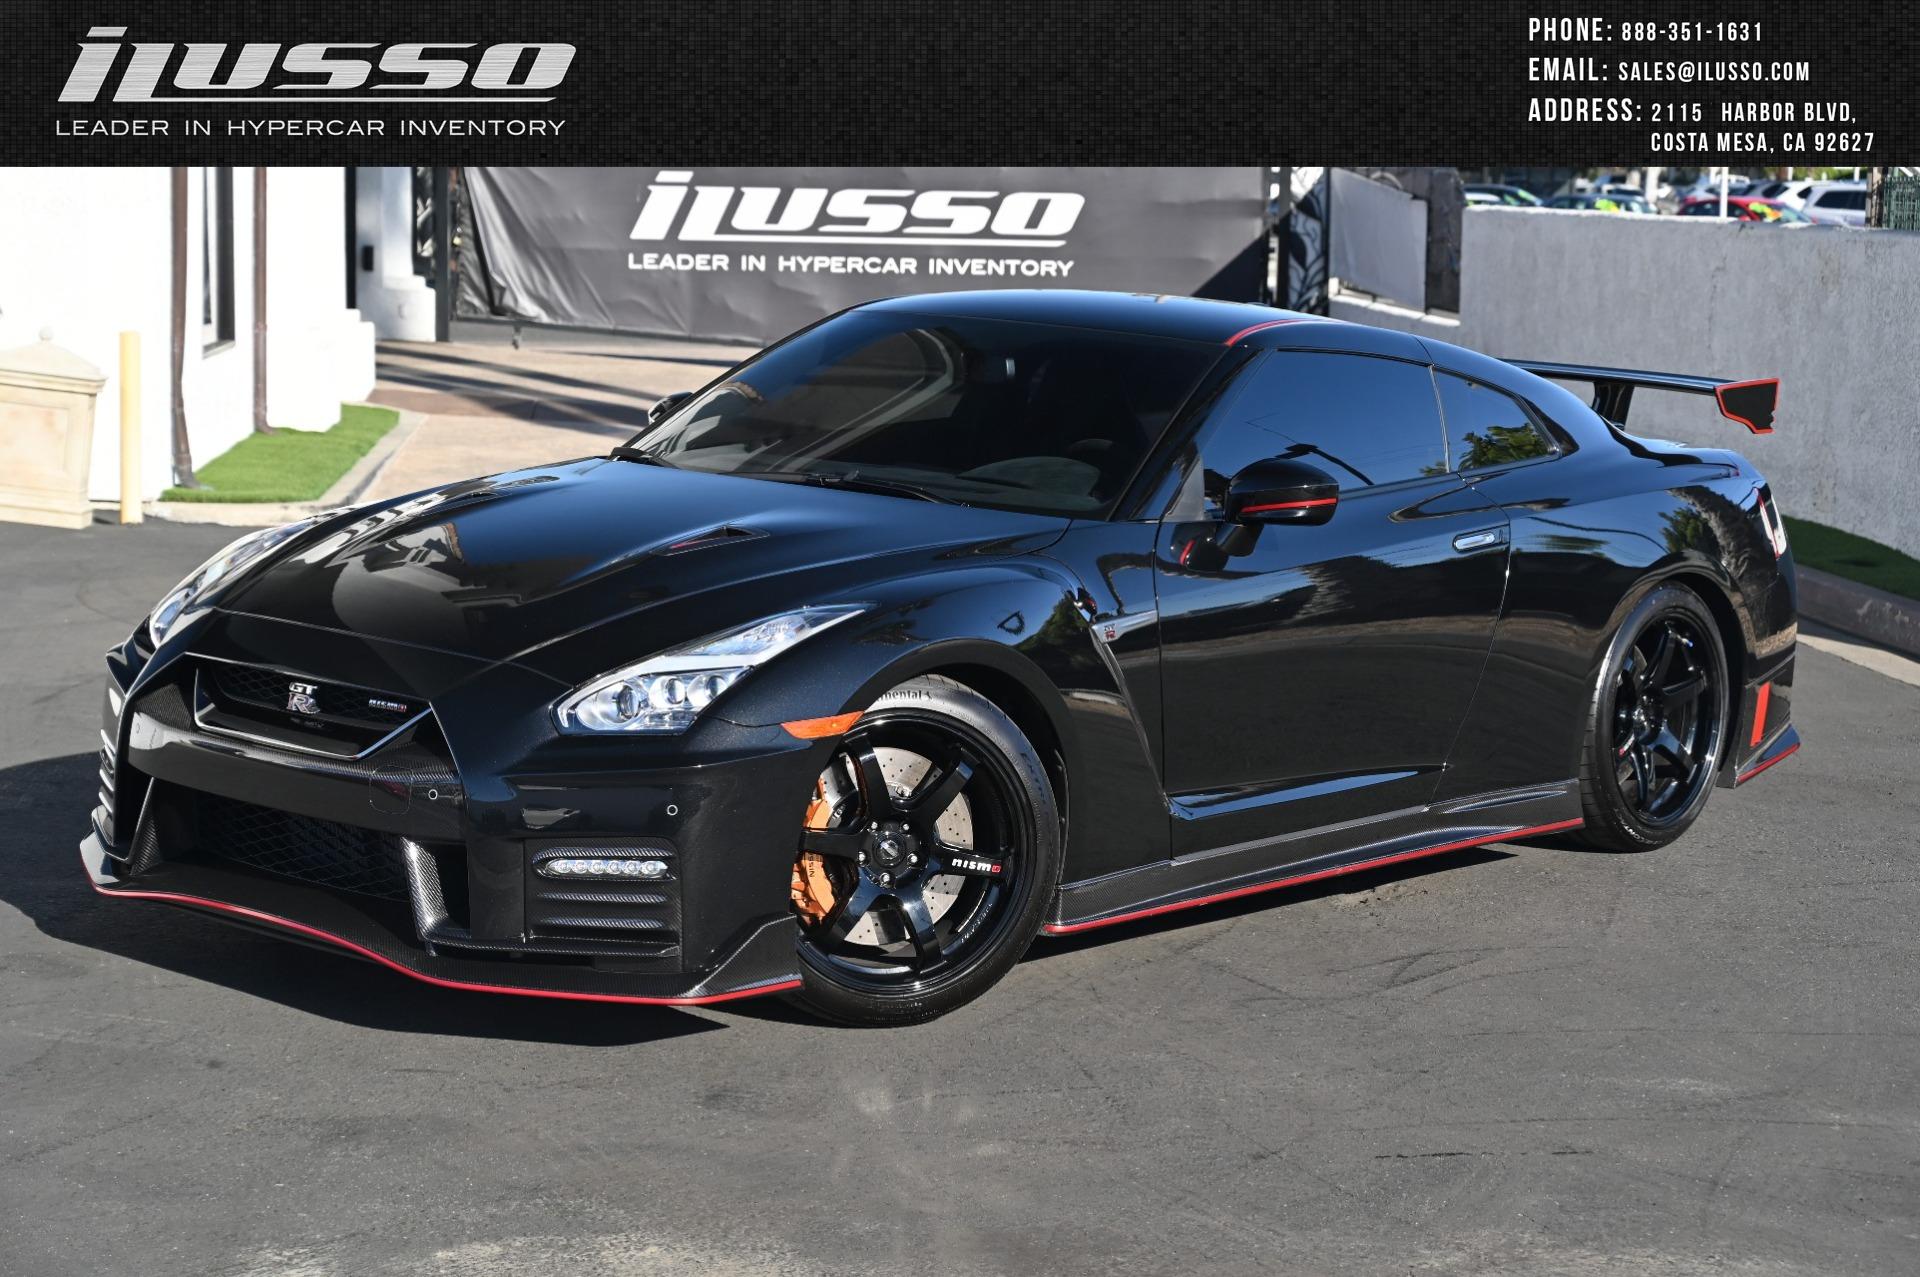 Used 2018 Nissan GT-R NISMO For Sale (Sold) | Ilusso Stock #710320